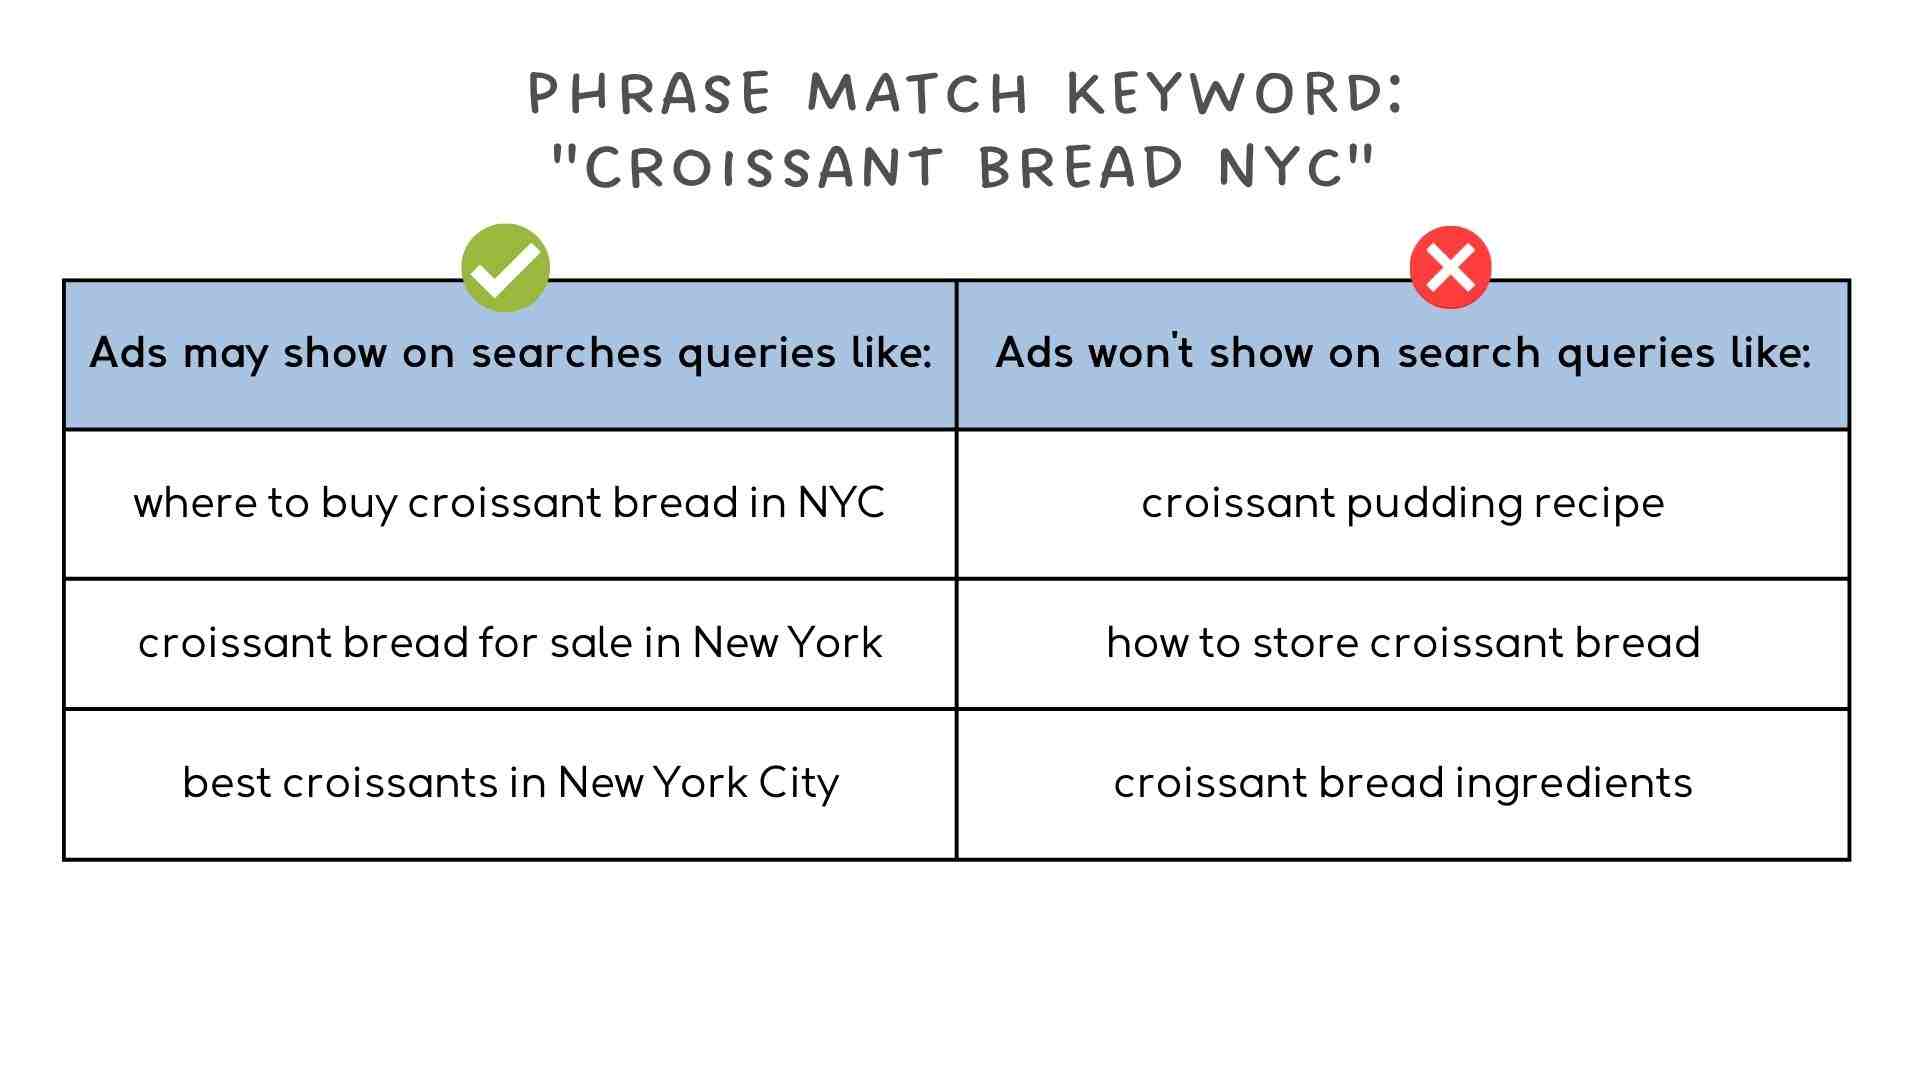 Phrase match type for the keyword "croissant bread NYC"